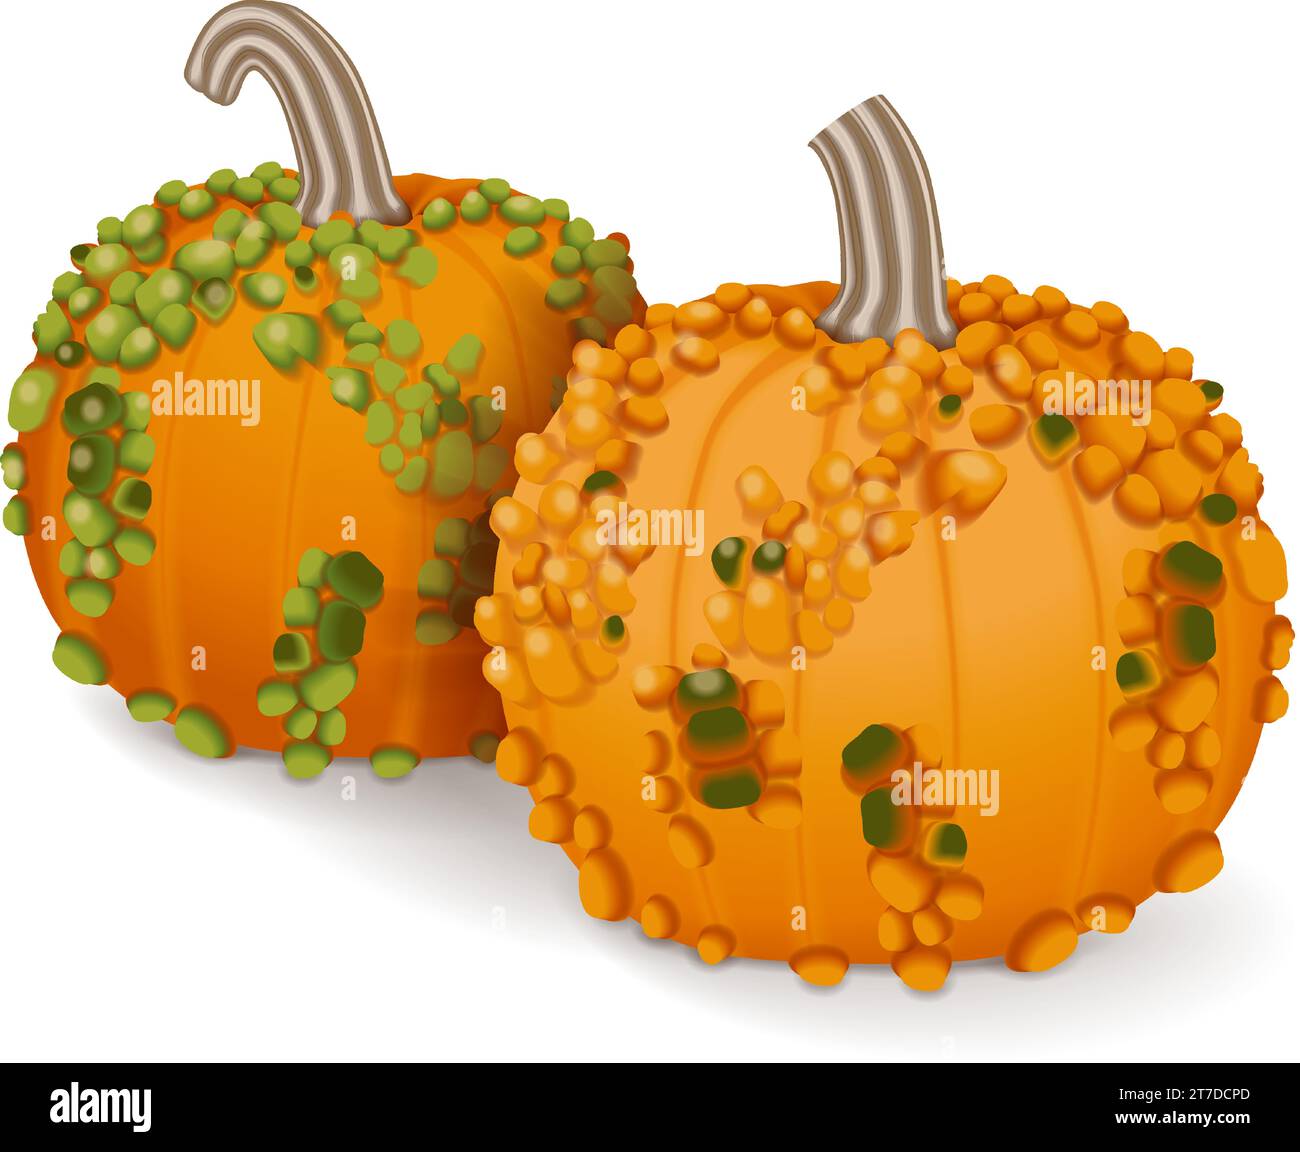 Group of Knucklehead Pumpkins. Winter squash. Cucurbita pepo. Fruits and vegetables. Isolated vector illustration. Stock Vector